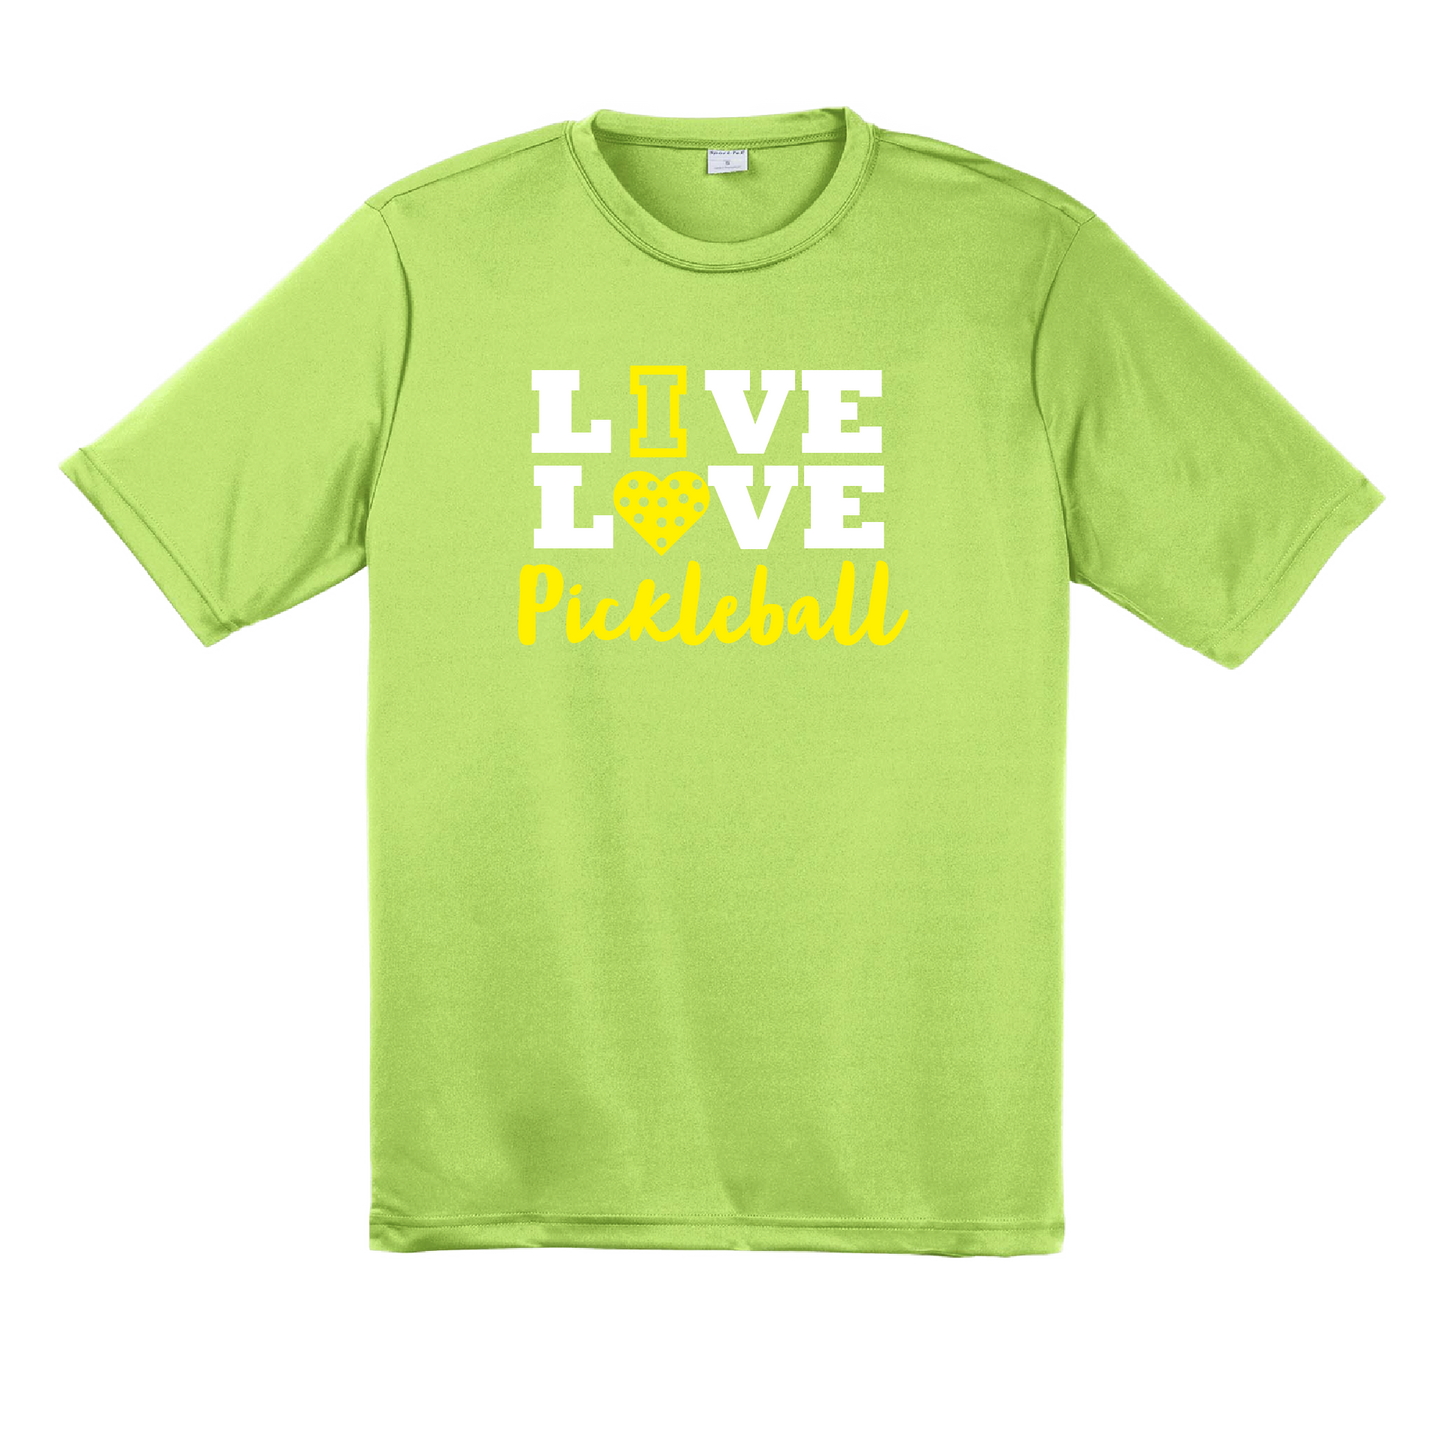 Pickleball Design: Live Love Pickleball  Men's Style: Short Sleeve  Shirts are lightweight, roomy and highly breathable. These moisture-wicking shirts are designed for athletic performance. They feature PosiCharge technology to lock in color and prevent logos from fading. Removable tag and set-in sleeves for comfort.